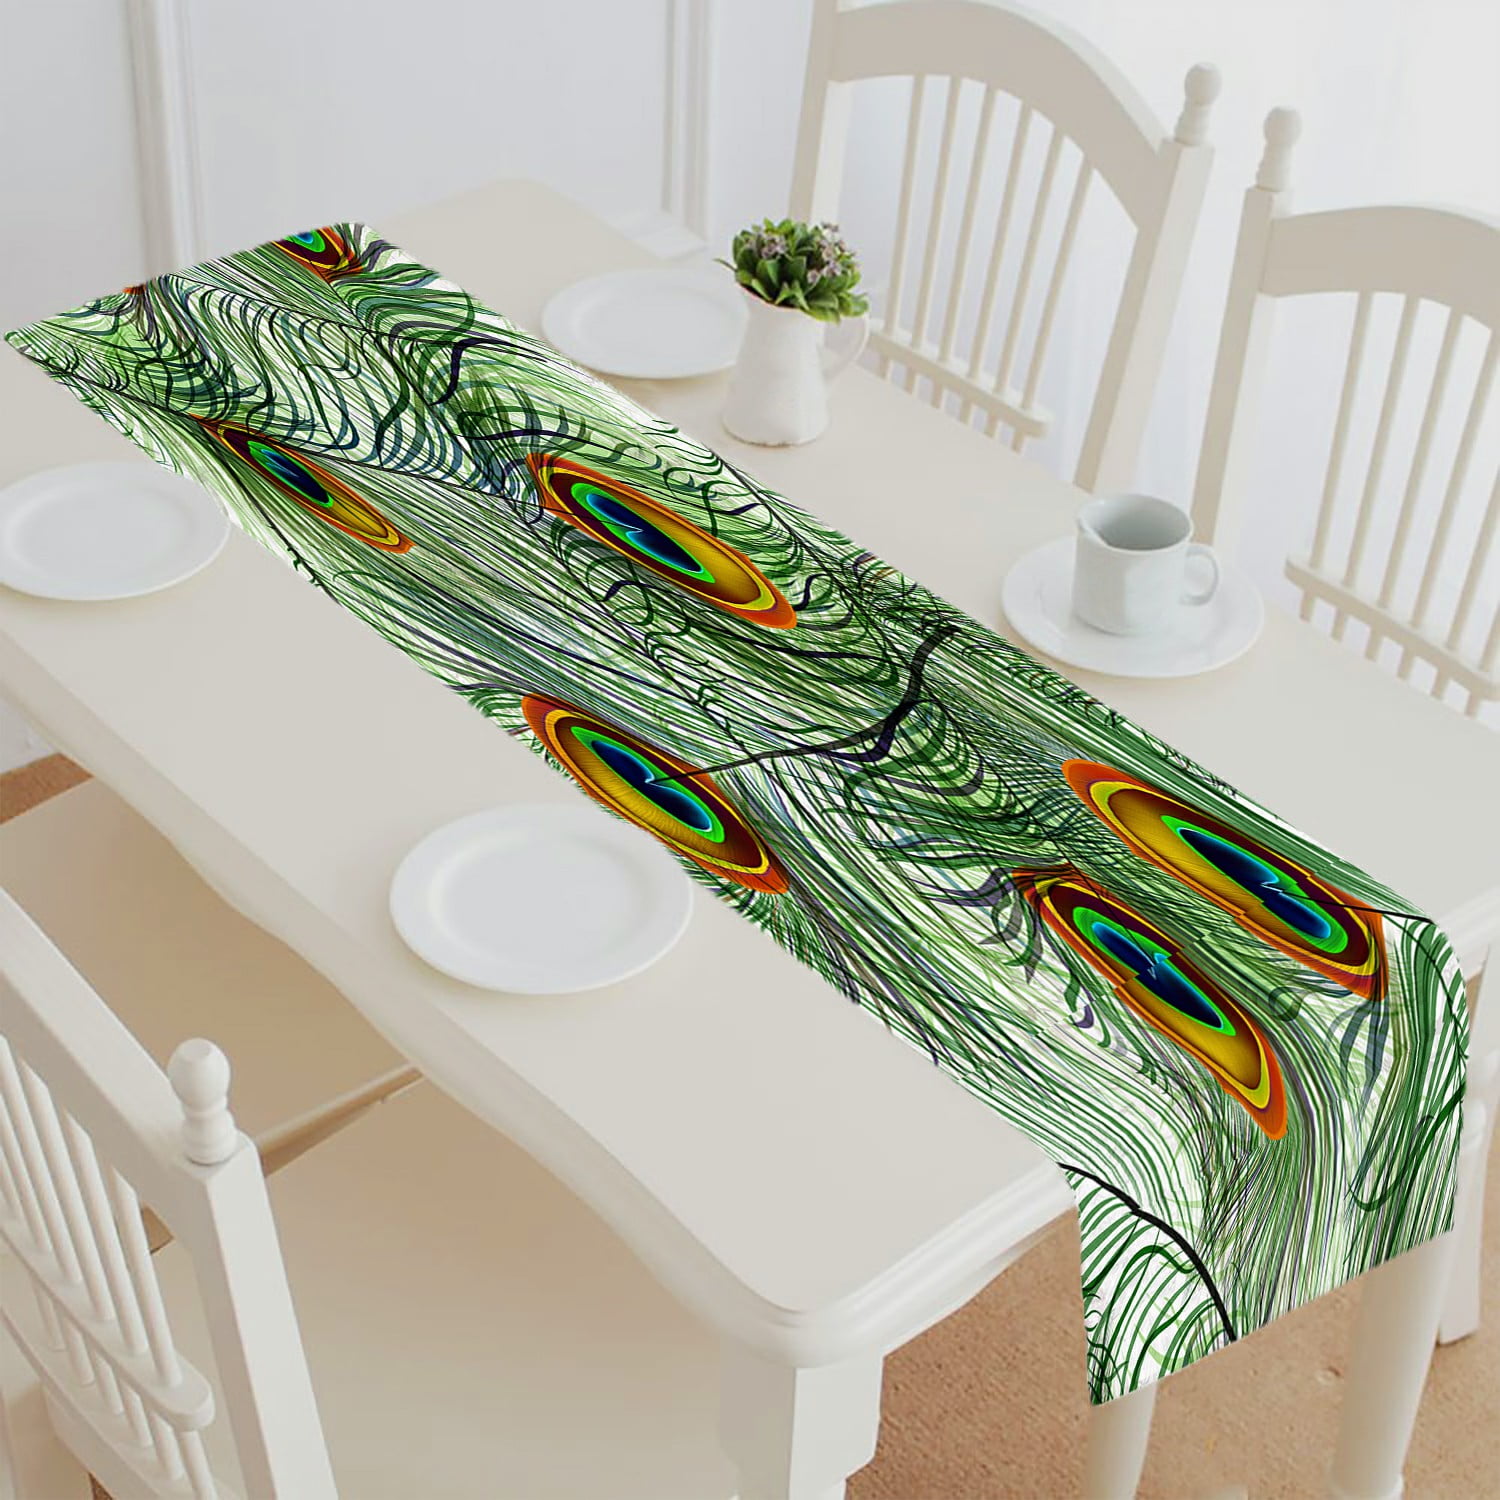 ALAZA U Life Vintage Peacock Feather Table Runner Runners Cloth